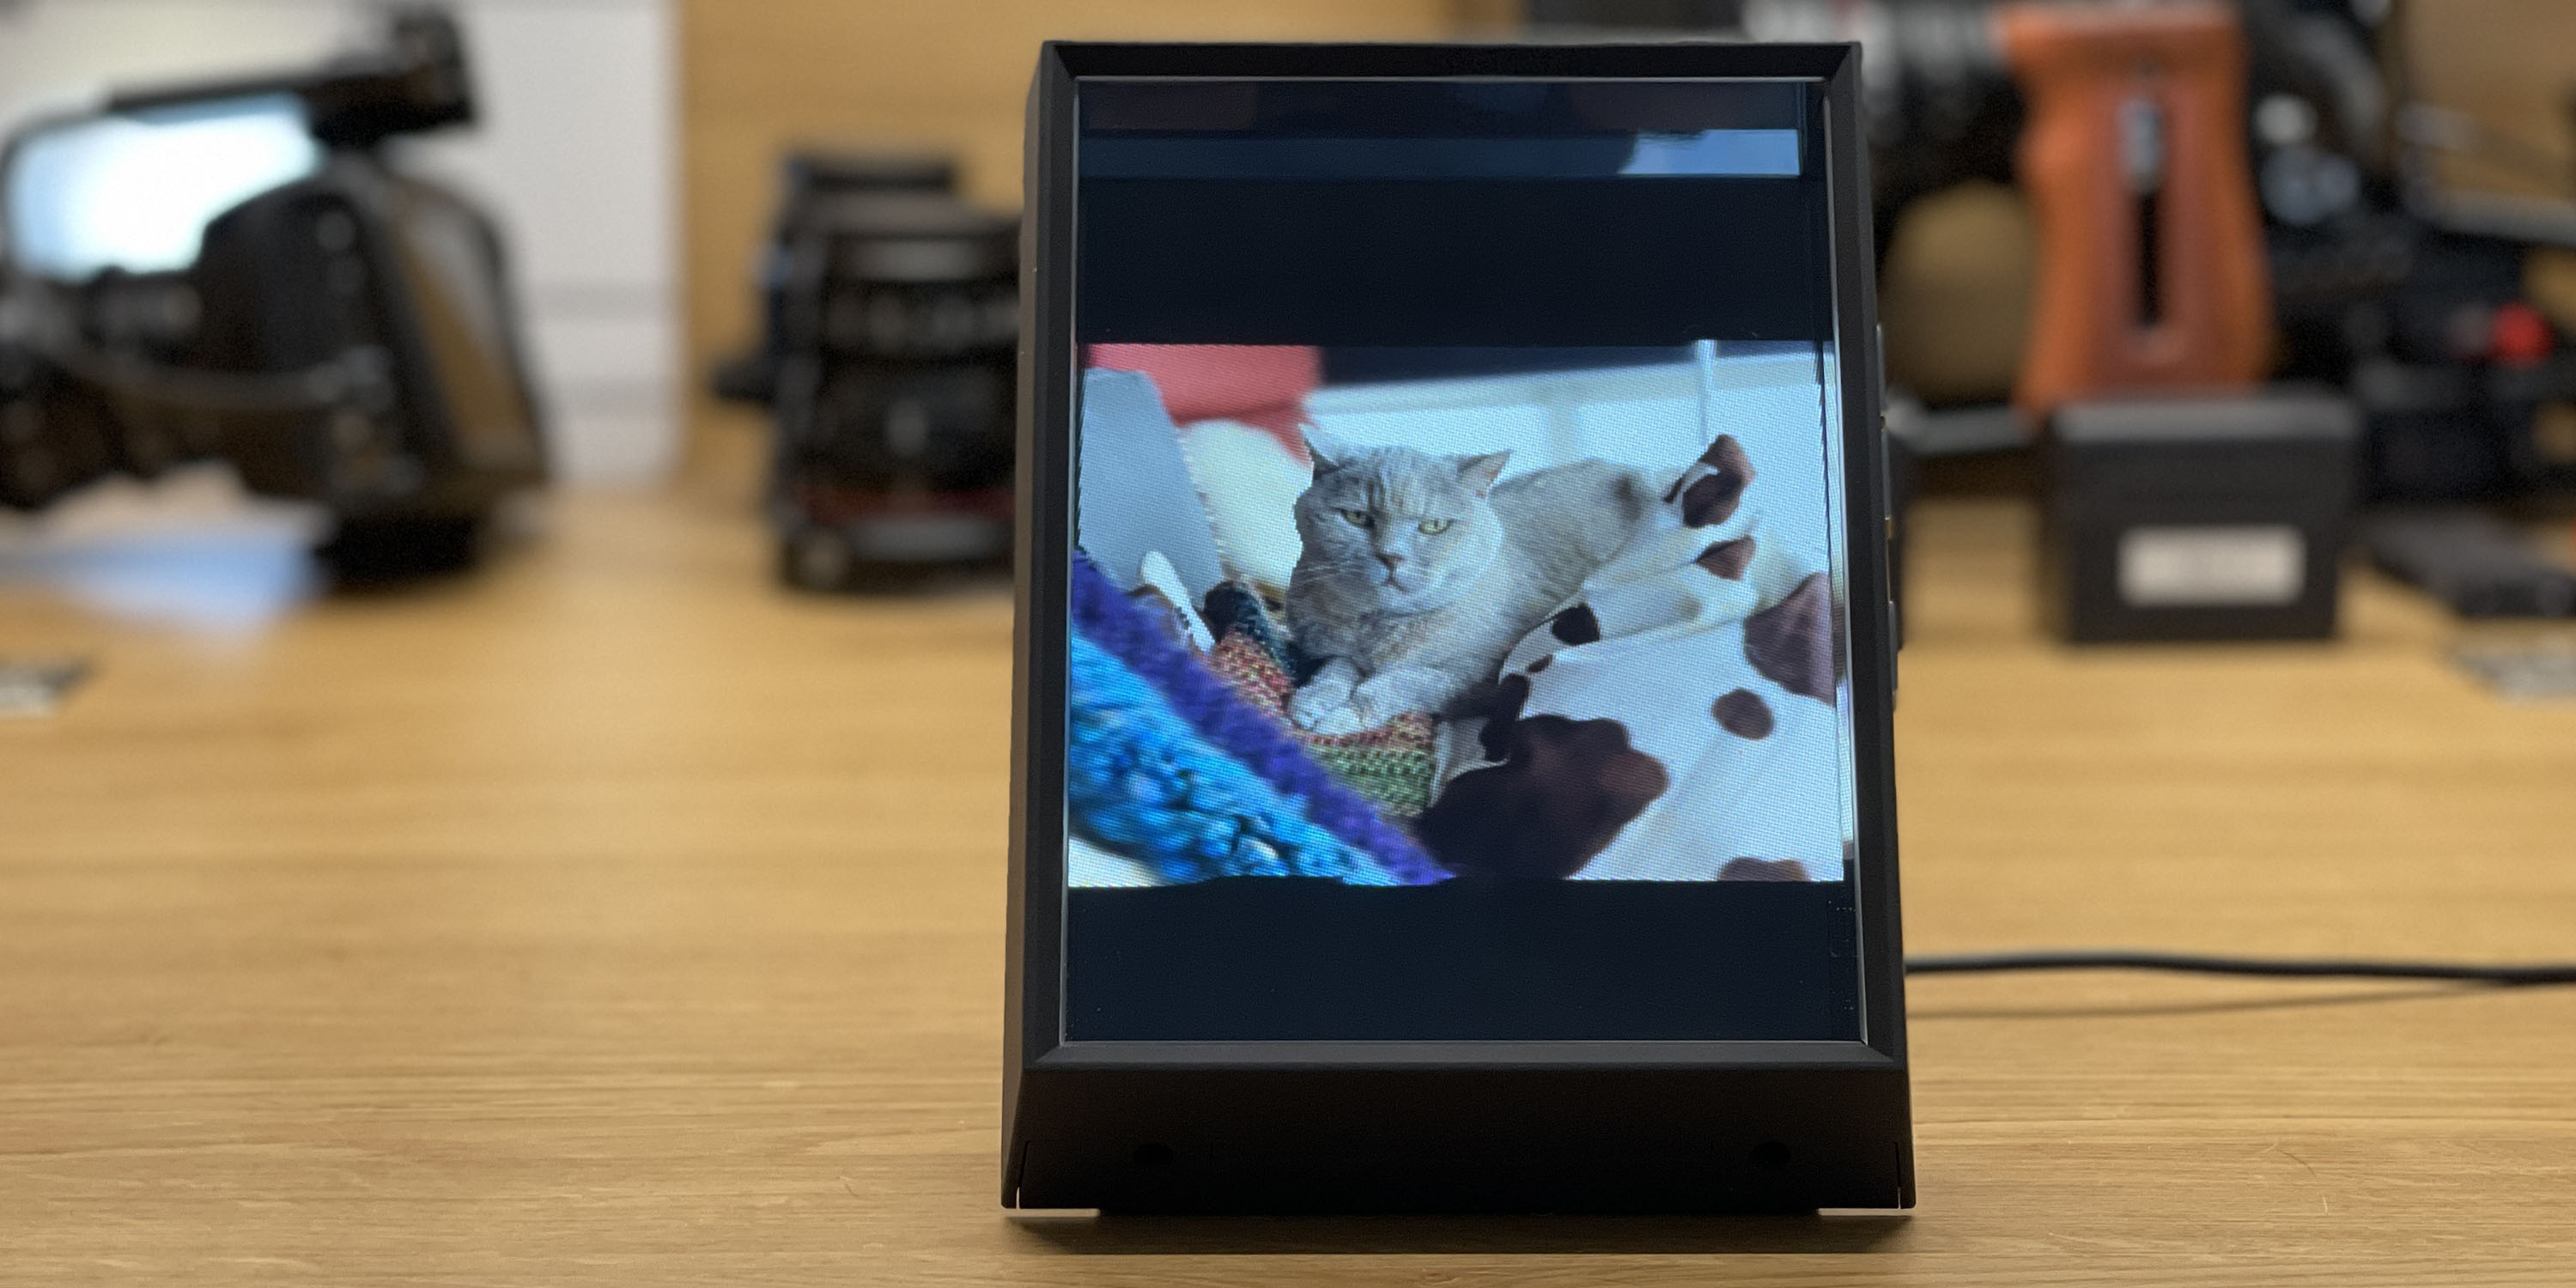 Looking Glass Portrait turns iPhone photos into holograms - 9to5Mac